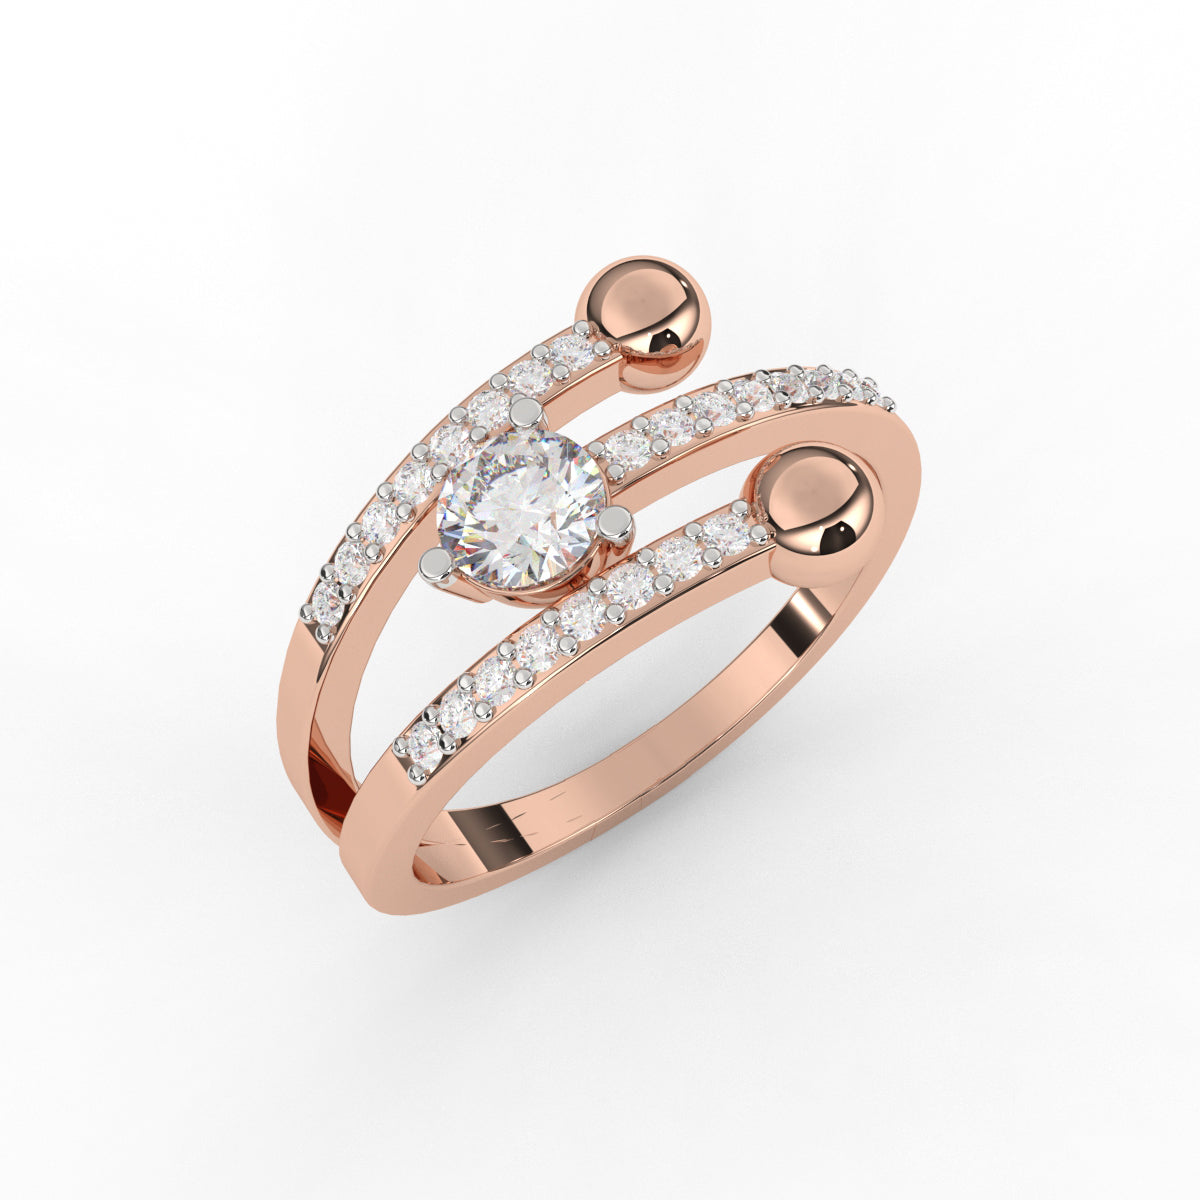 How to Buy Dainty Engagement Rings Online | Whiteflash